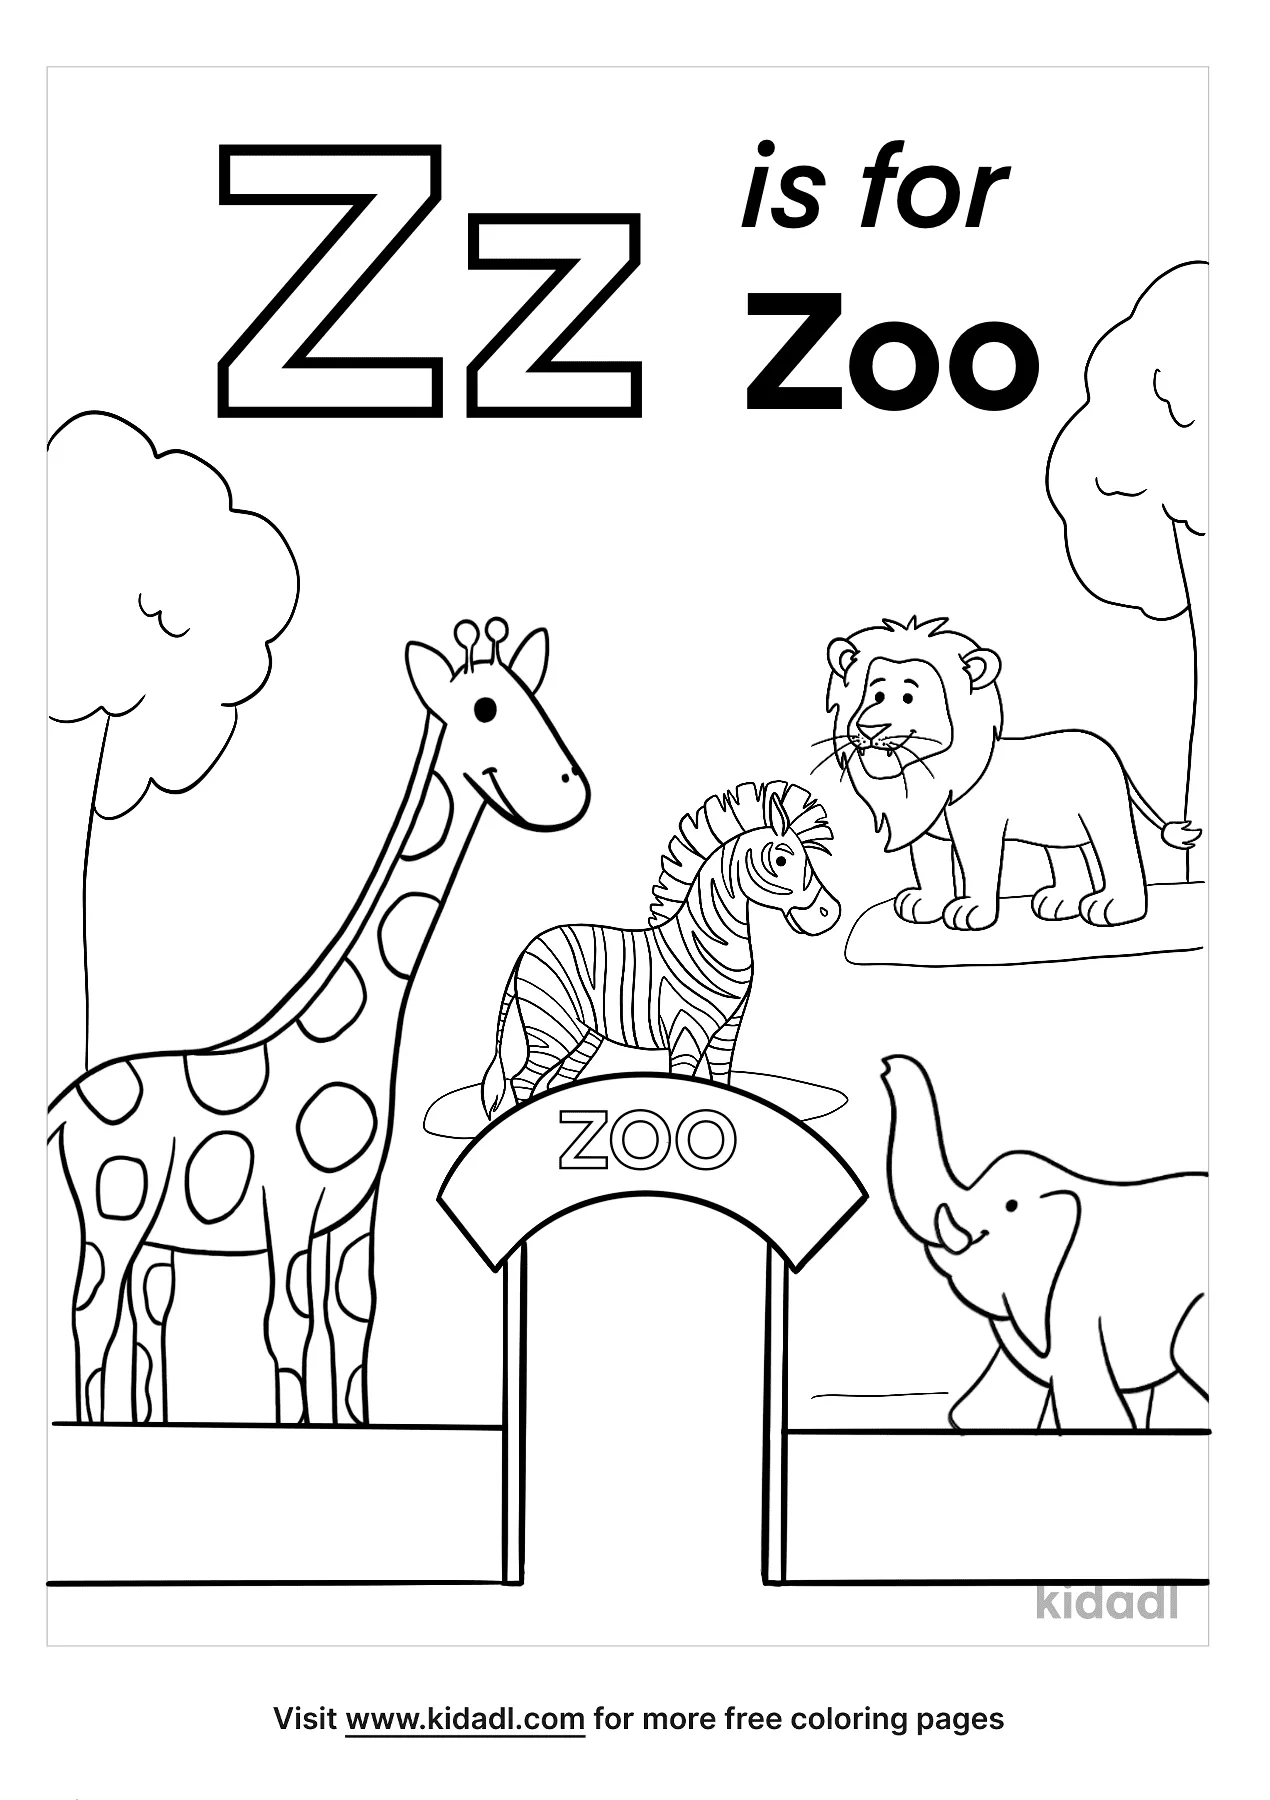 Z Is For Zoo Coloring Pages   Free Letters Coloring Pages   Kidadl